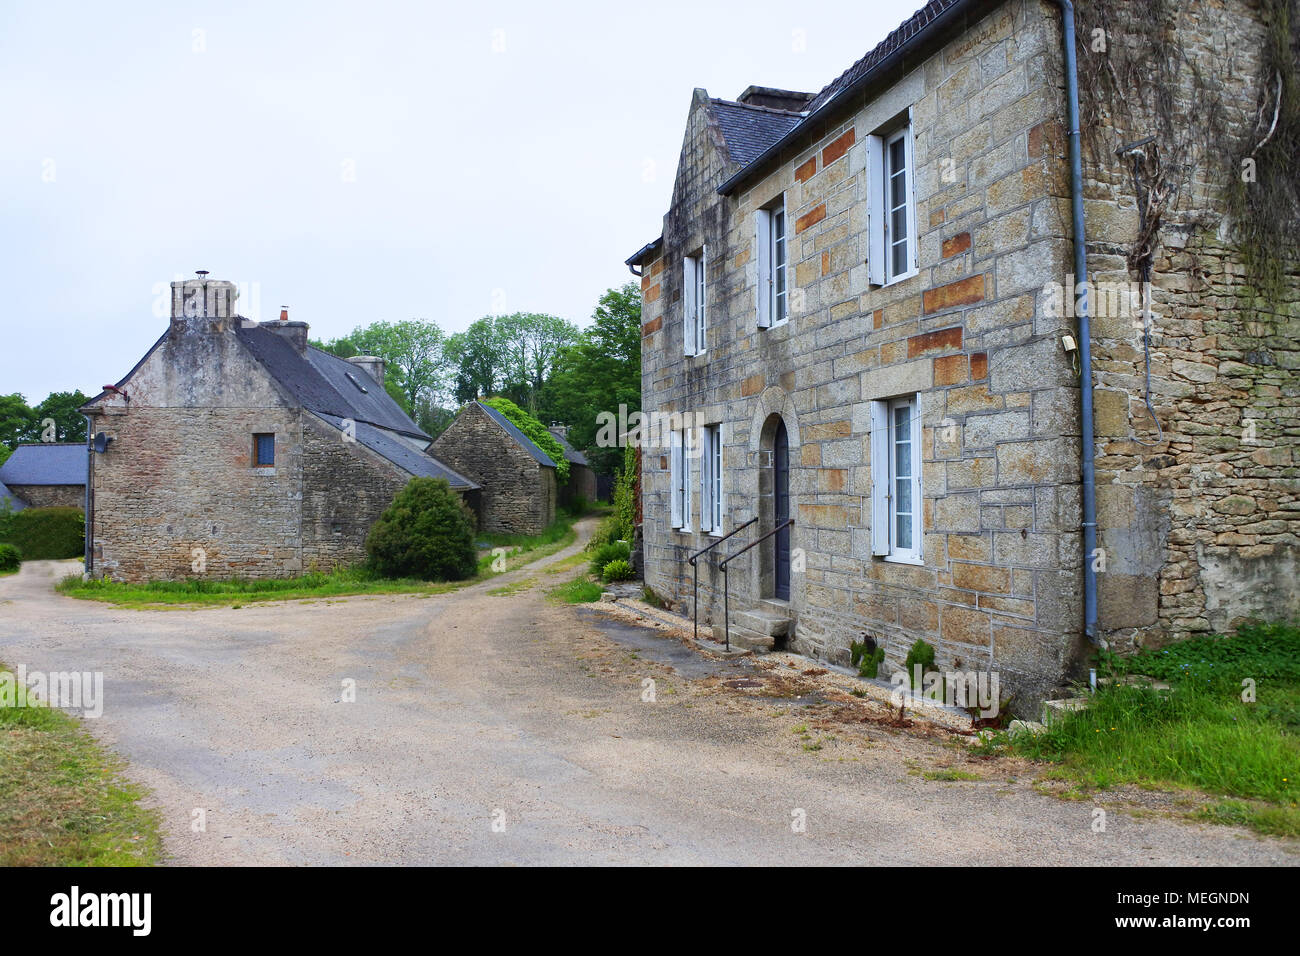 A group of farm buildings, Berrien, Brittany, France - John Gollop Stock Photo